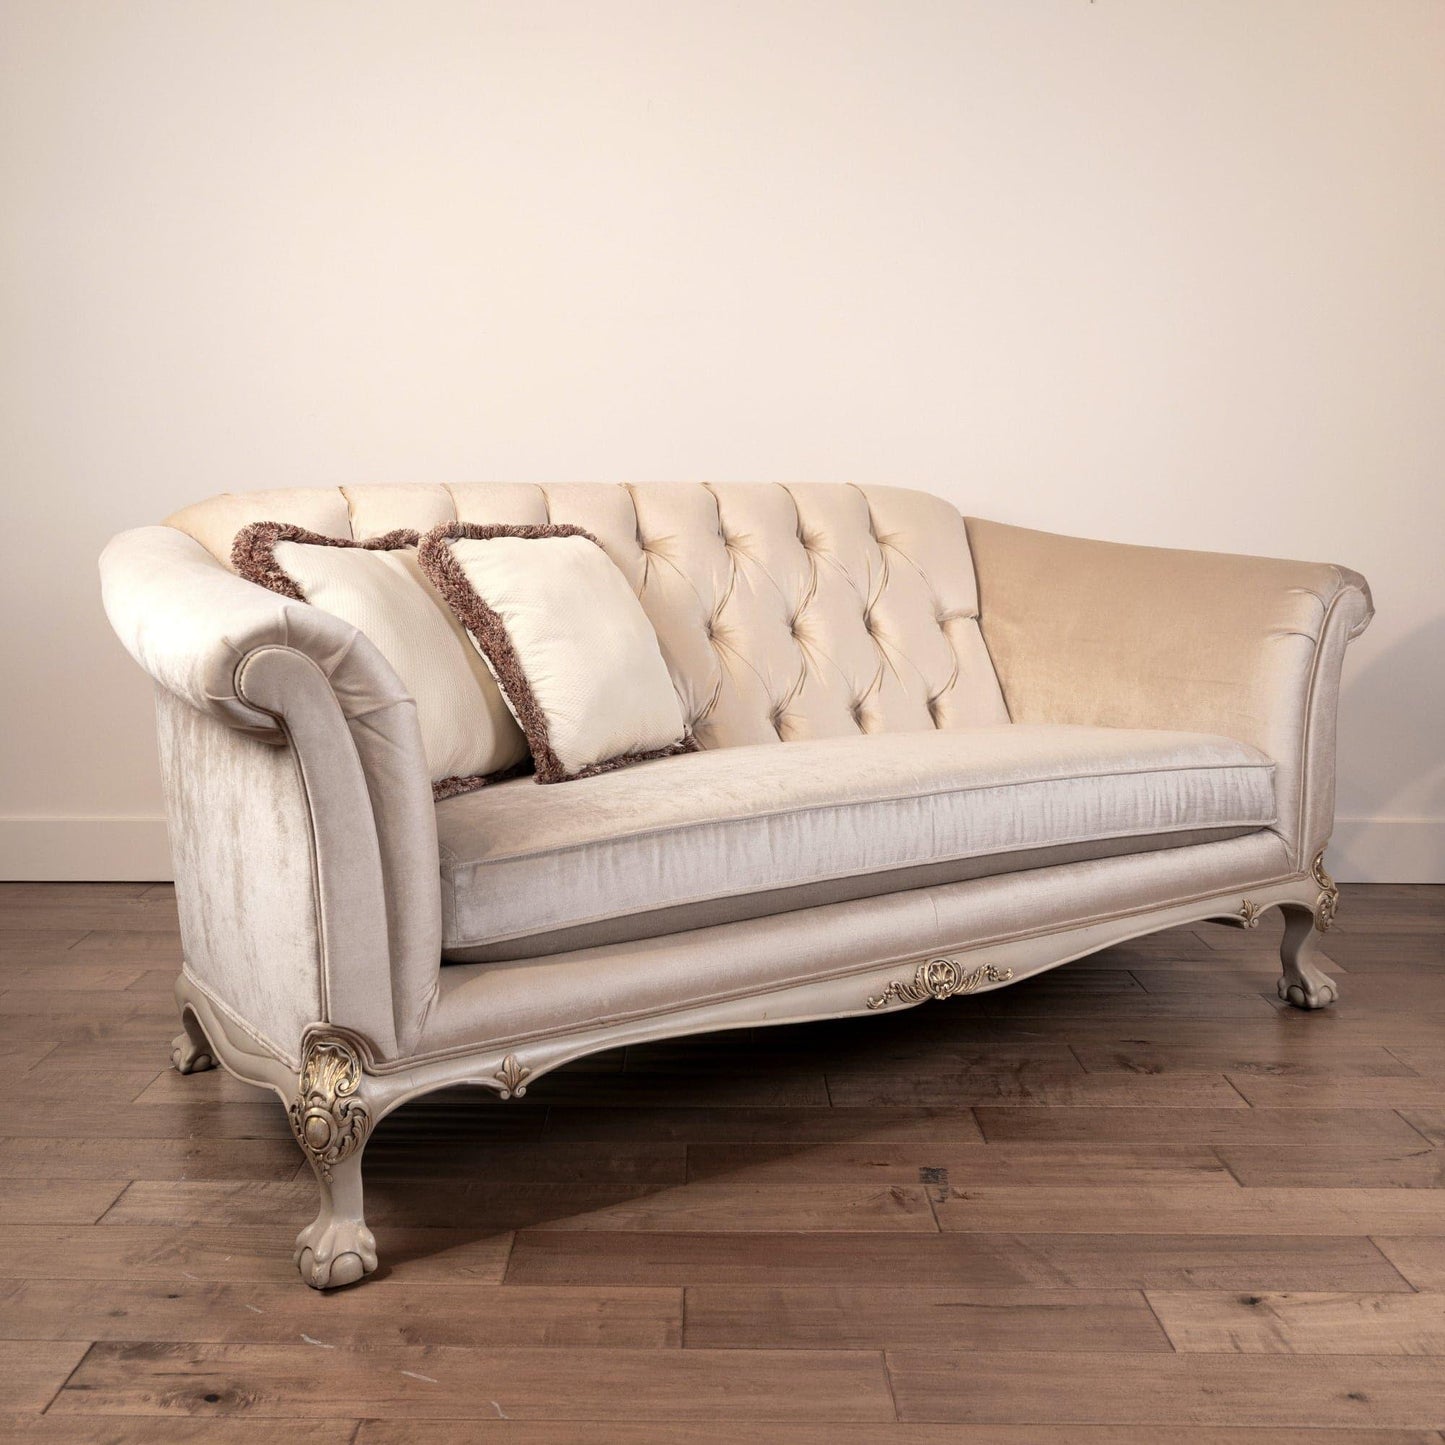 GEORGIAN TUFTED-BACK SOFA – House of Chippendale